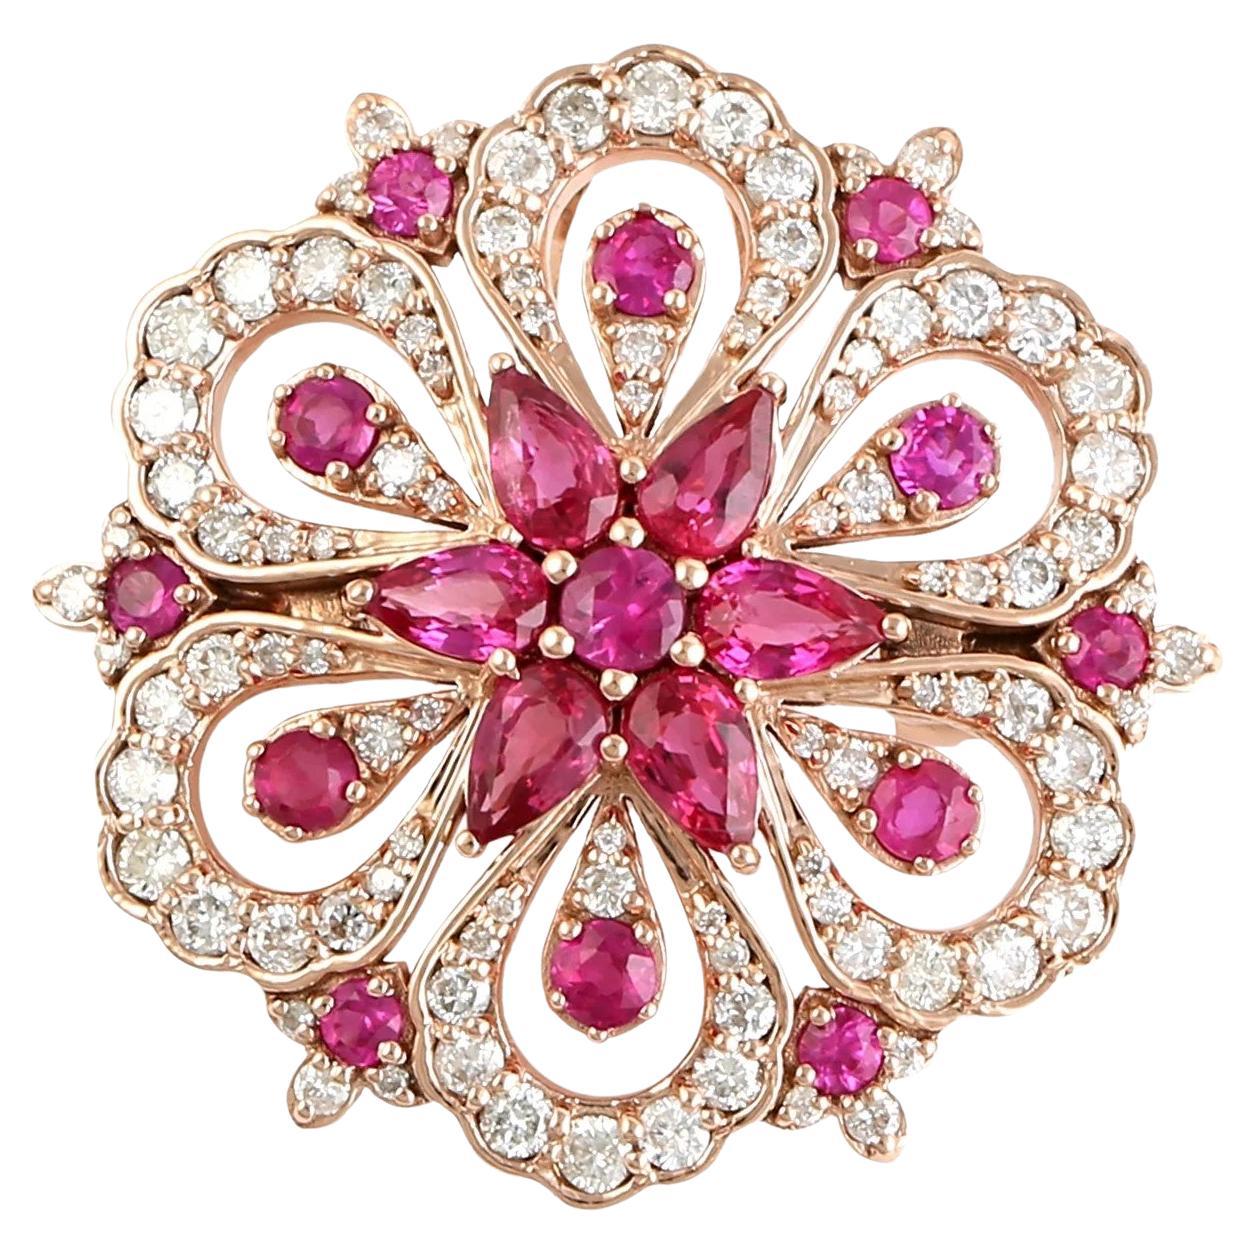 Meghna Jewels 2.94 carats ruby diamond 14K Gold Floral Pendant Brooch For Sale